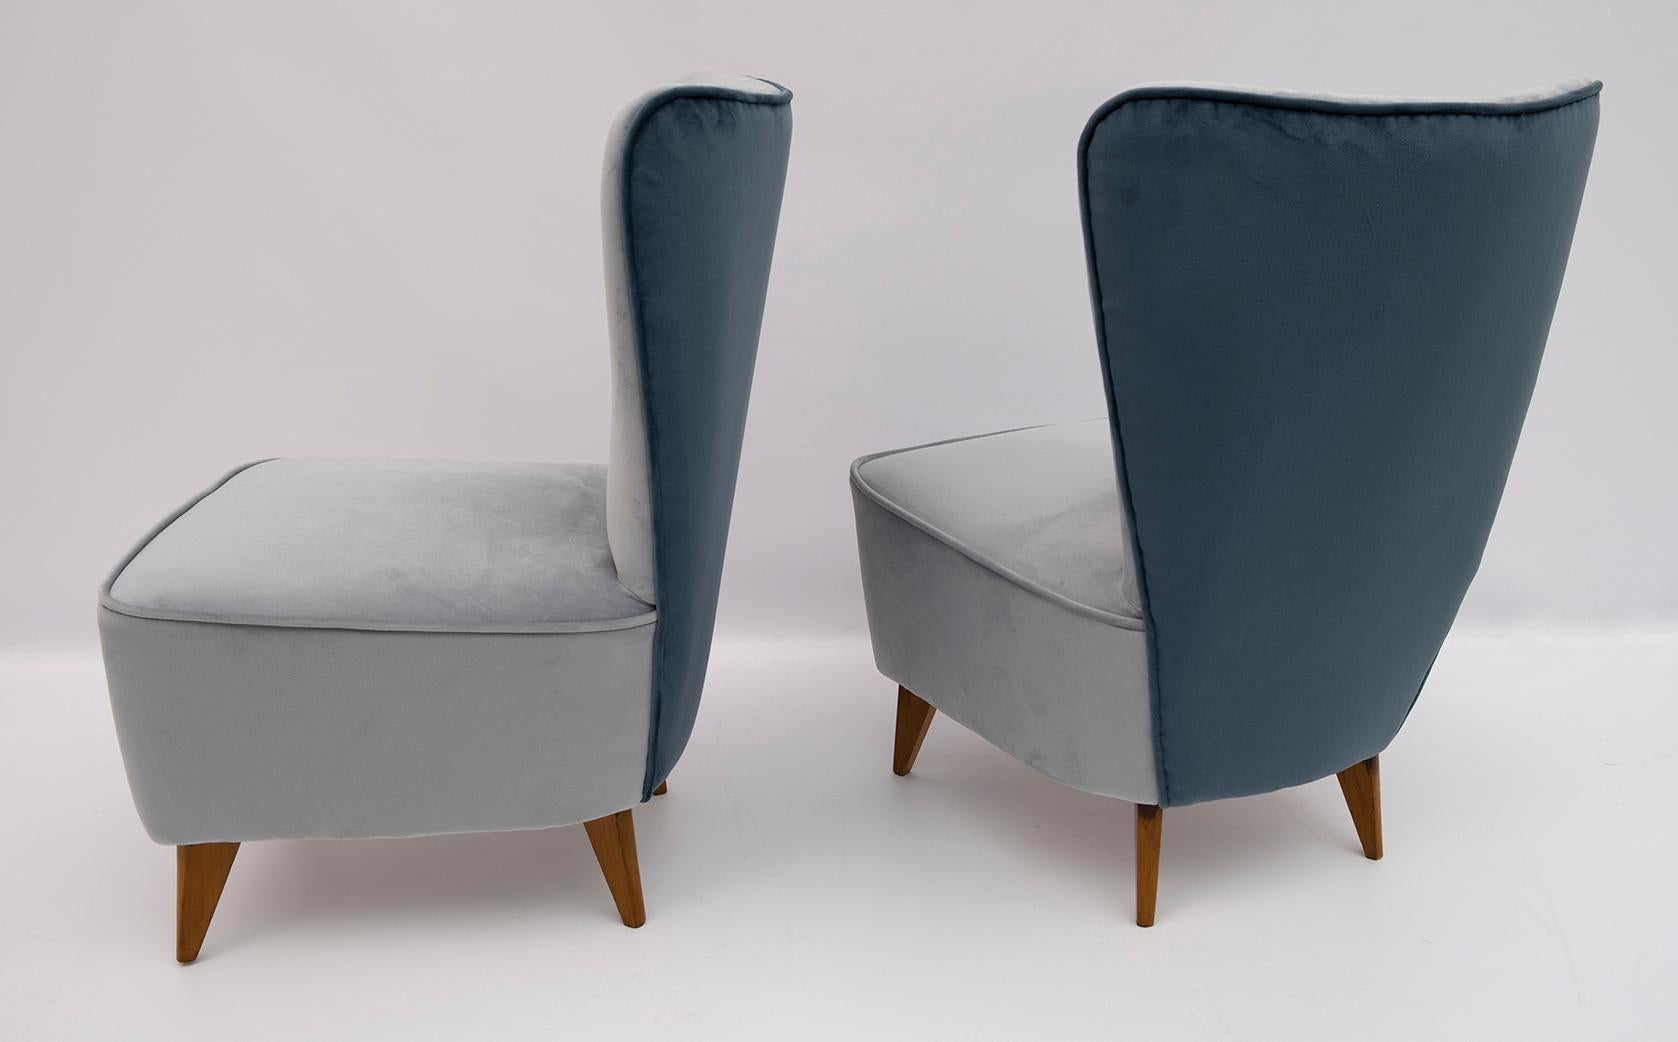 Pair of small armchairs designed by Guglielmo Veronesi and produced by I.S.A, 1950s.
The armchairs are upholstered in velvet, as shown in the photo, two colors.